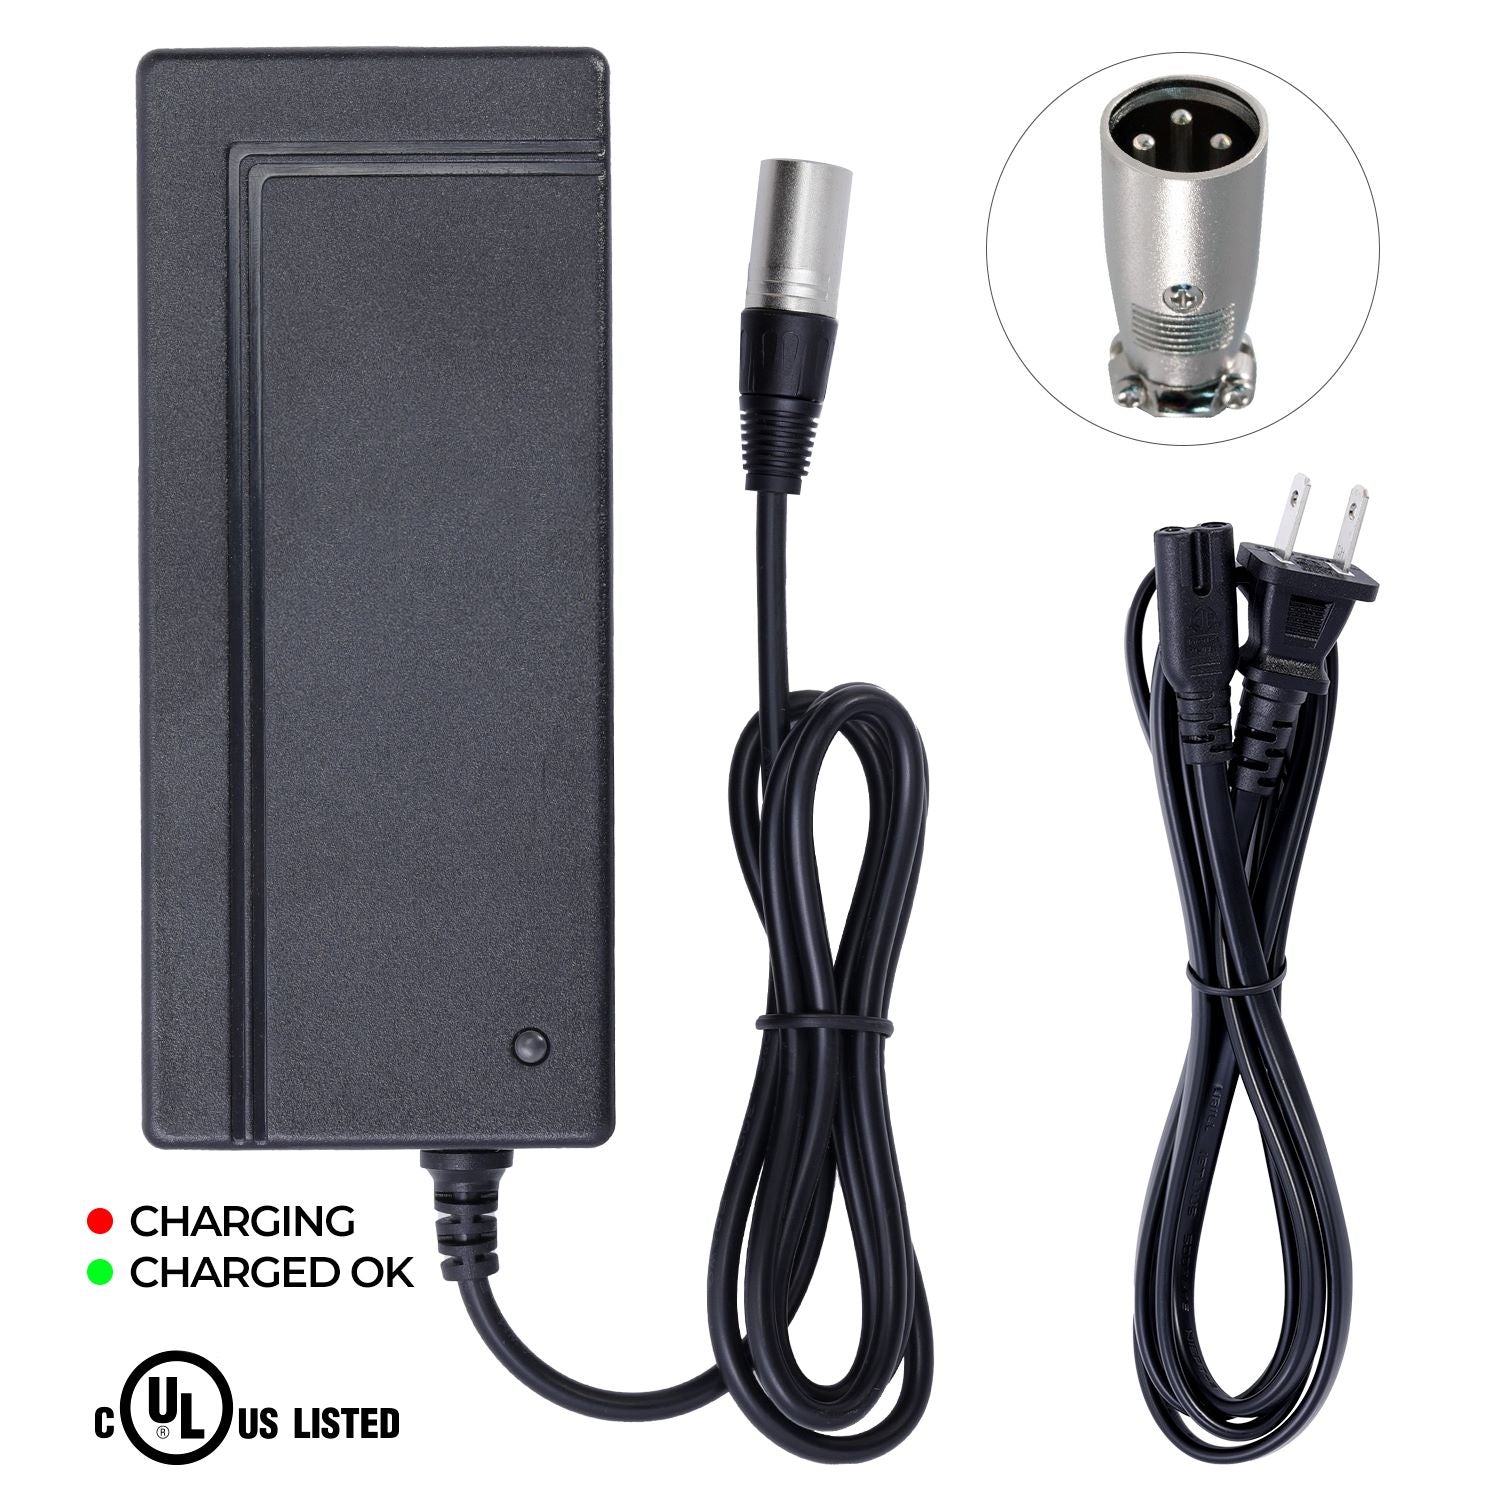 UL Certified Charger for Merits Cruiser Q Series Scooter